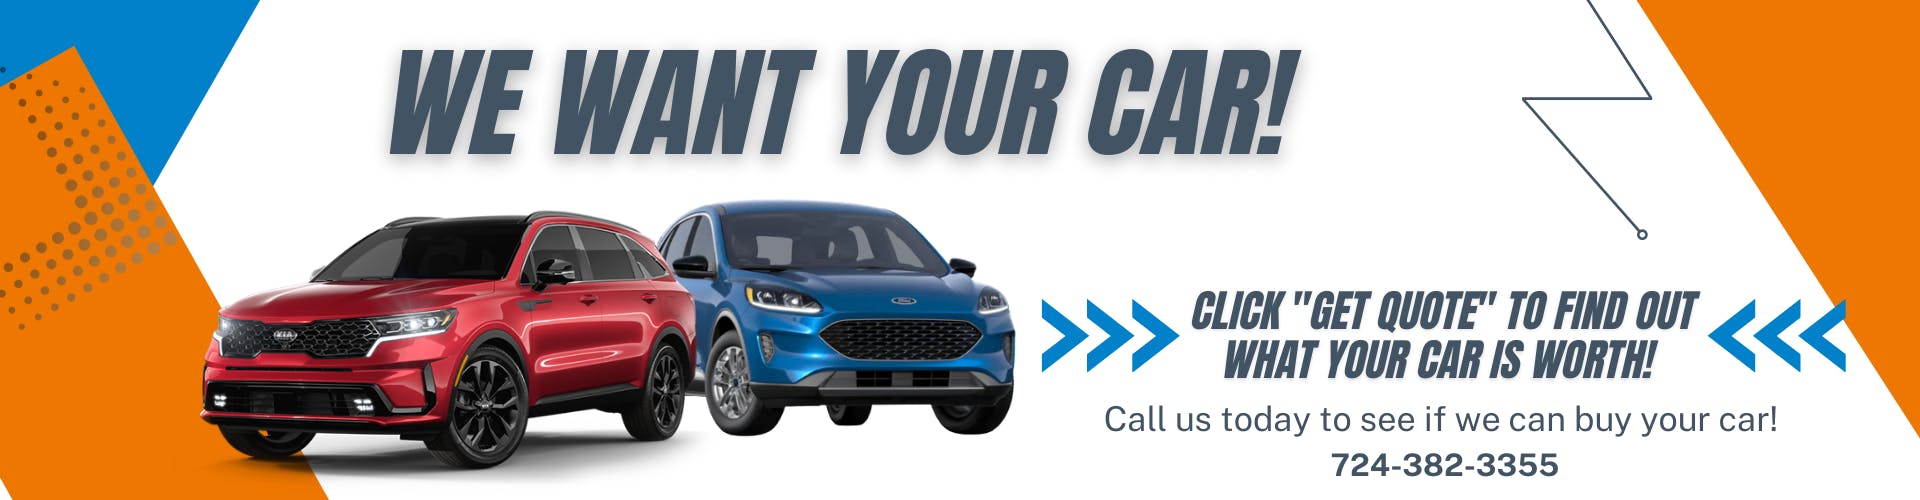 Homepage We want your car banner